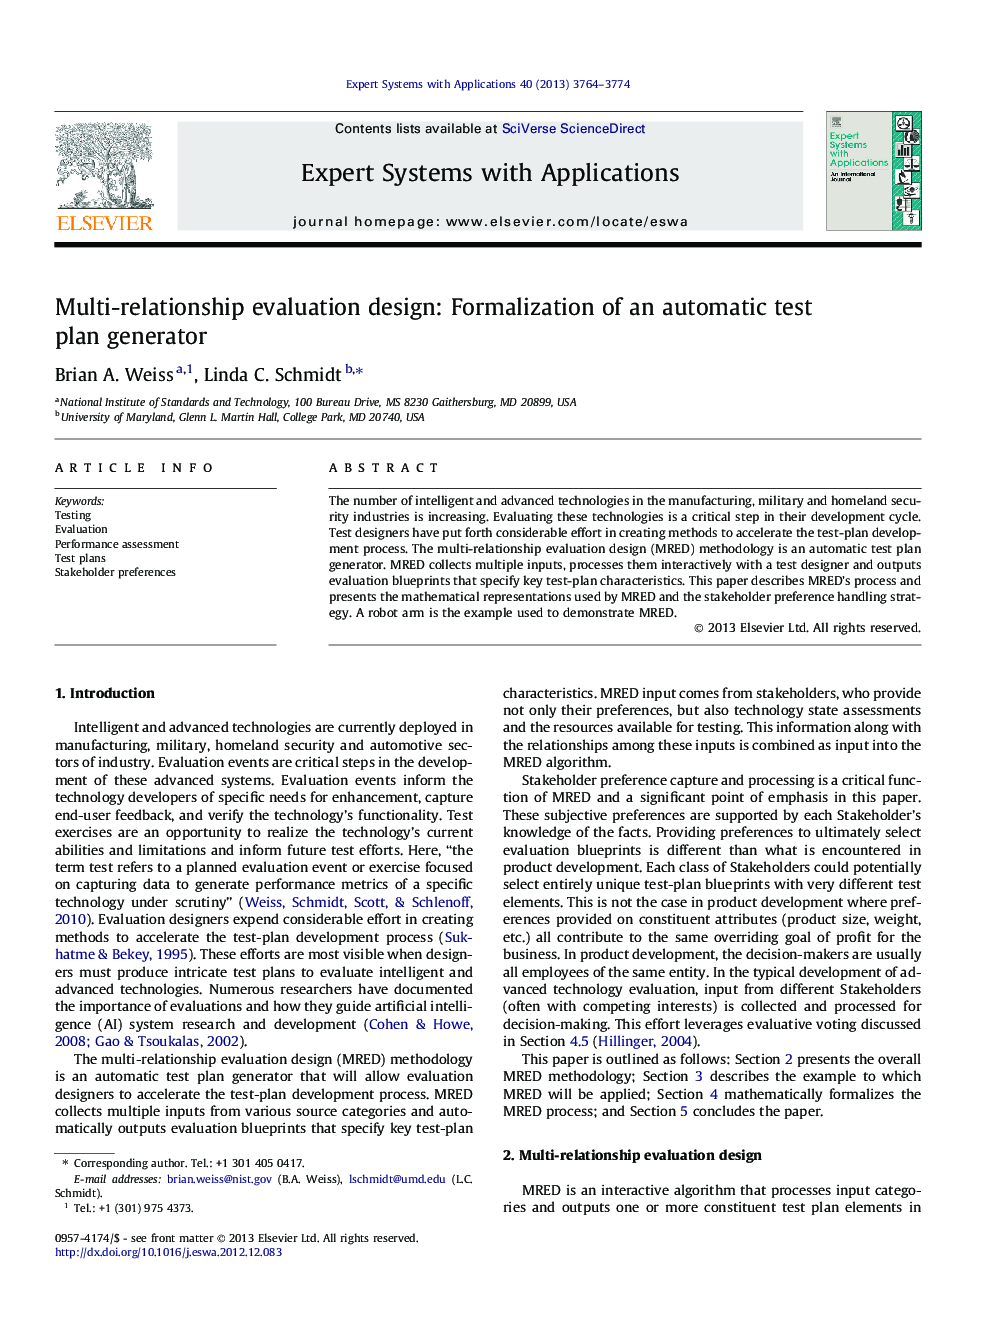 Multi-relationship evaluation design: Formalization of an automatic test plan generator